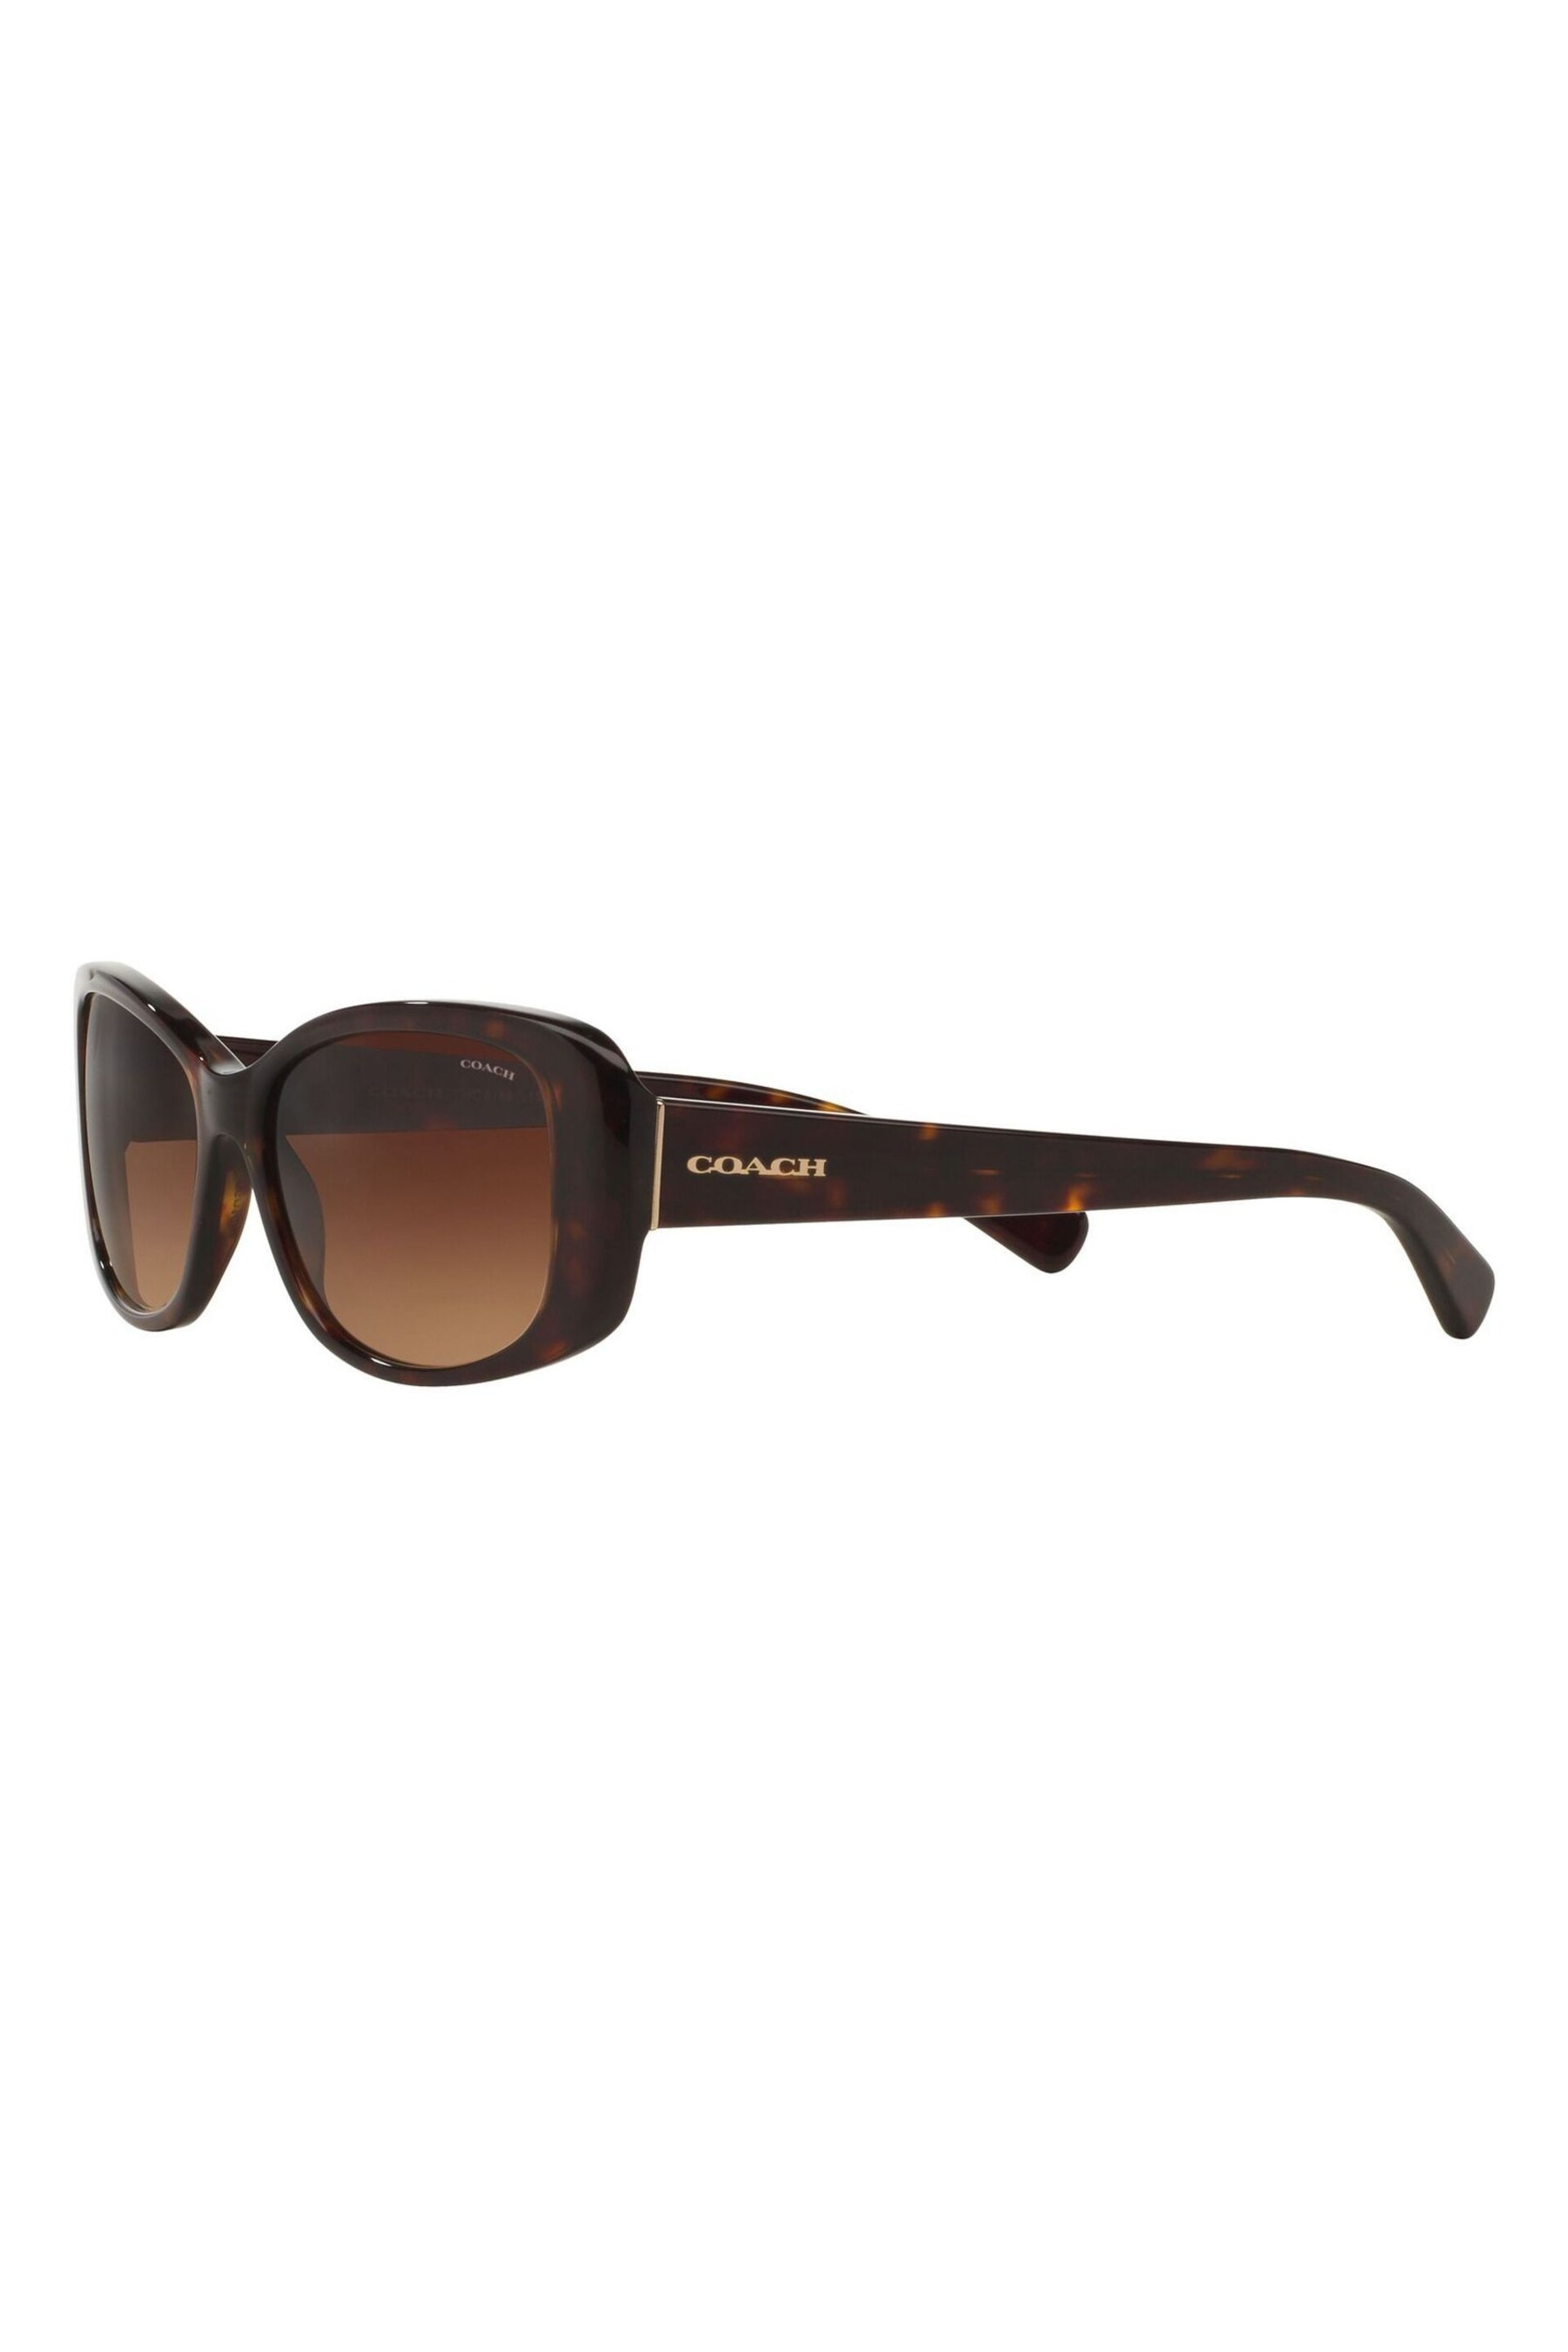 Coach Brown L156 Oval Sunglasses - Image 5 of 13